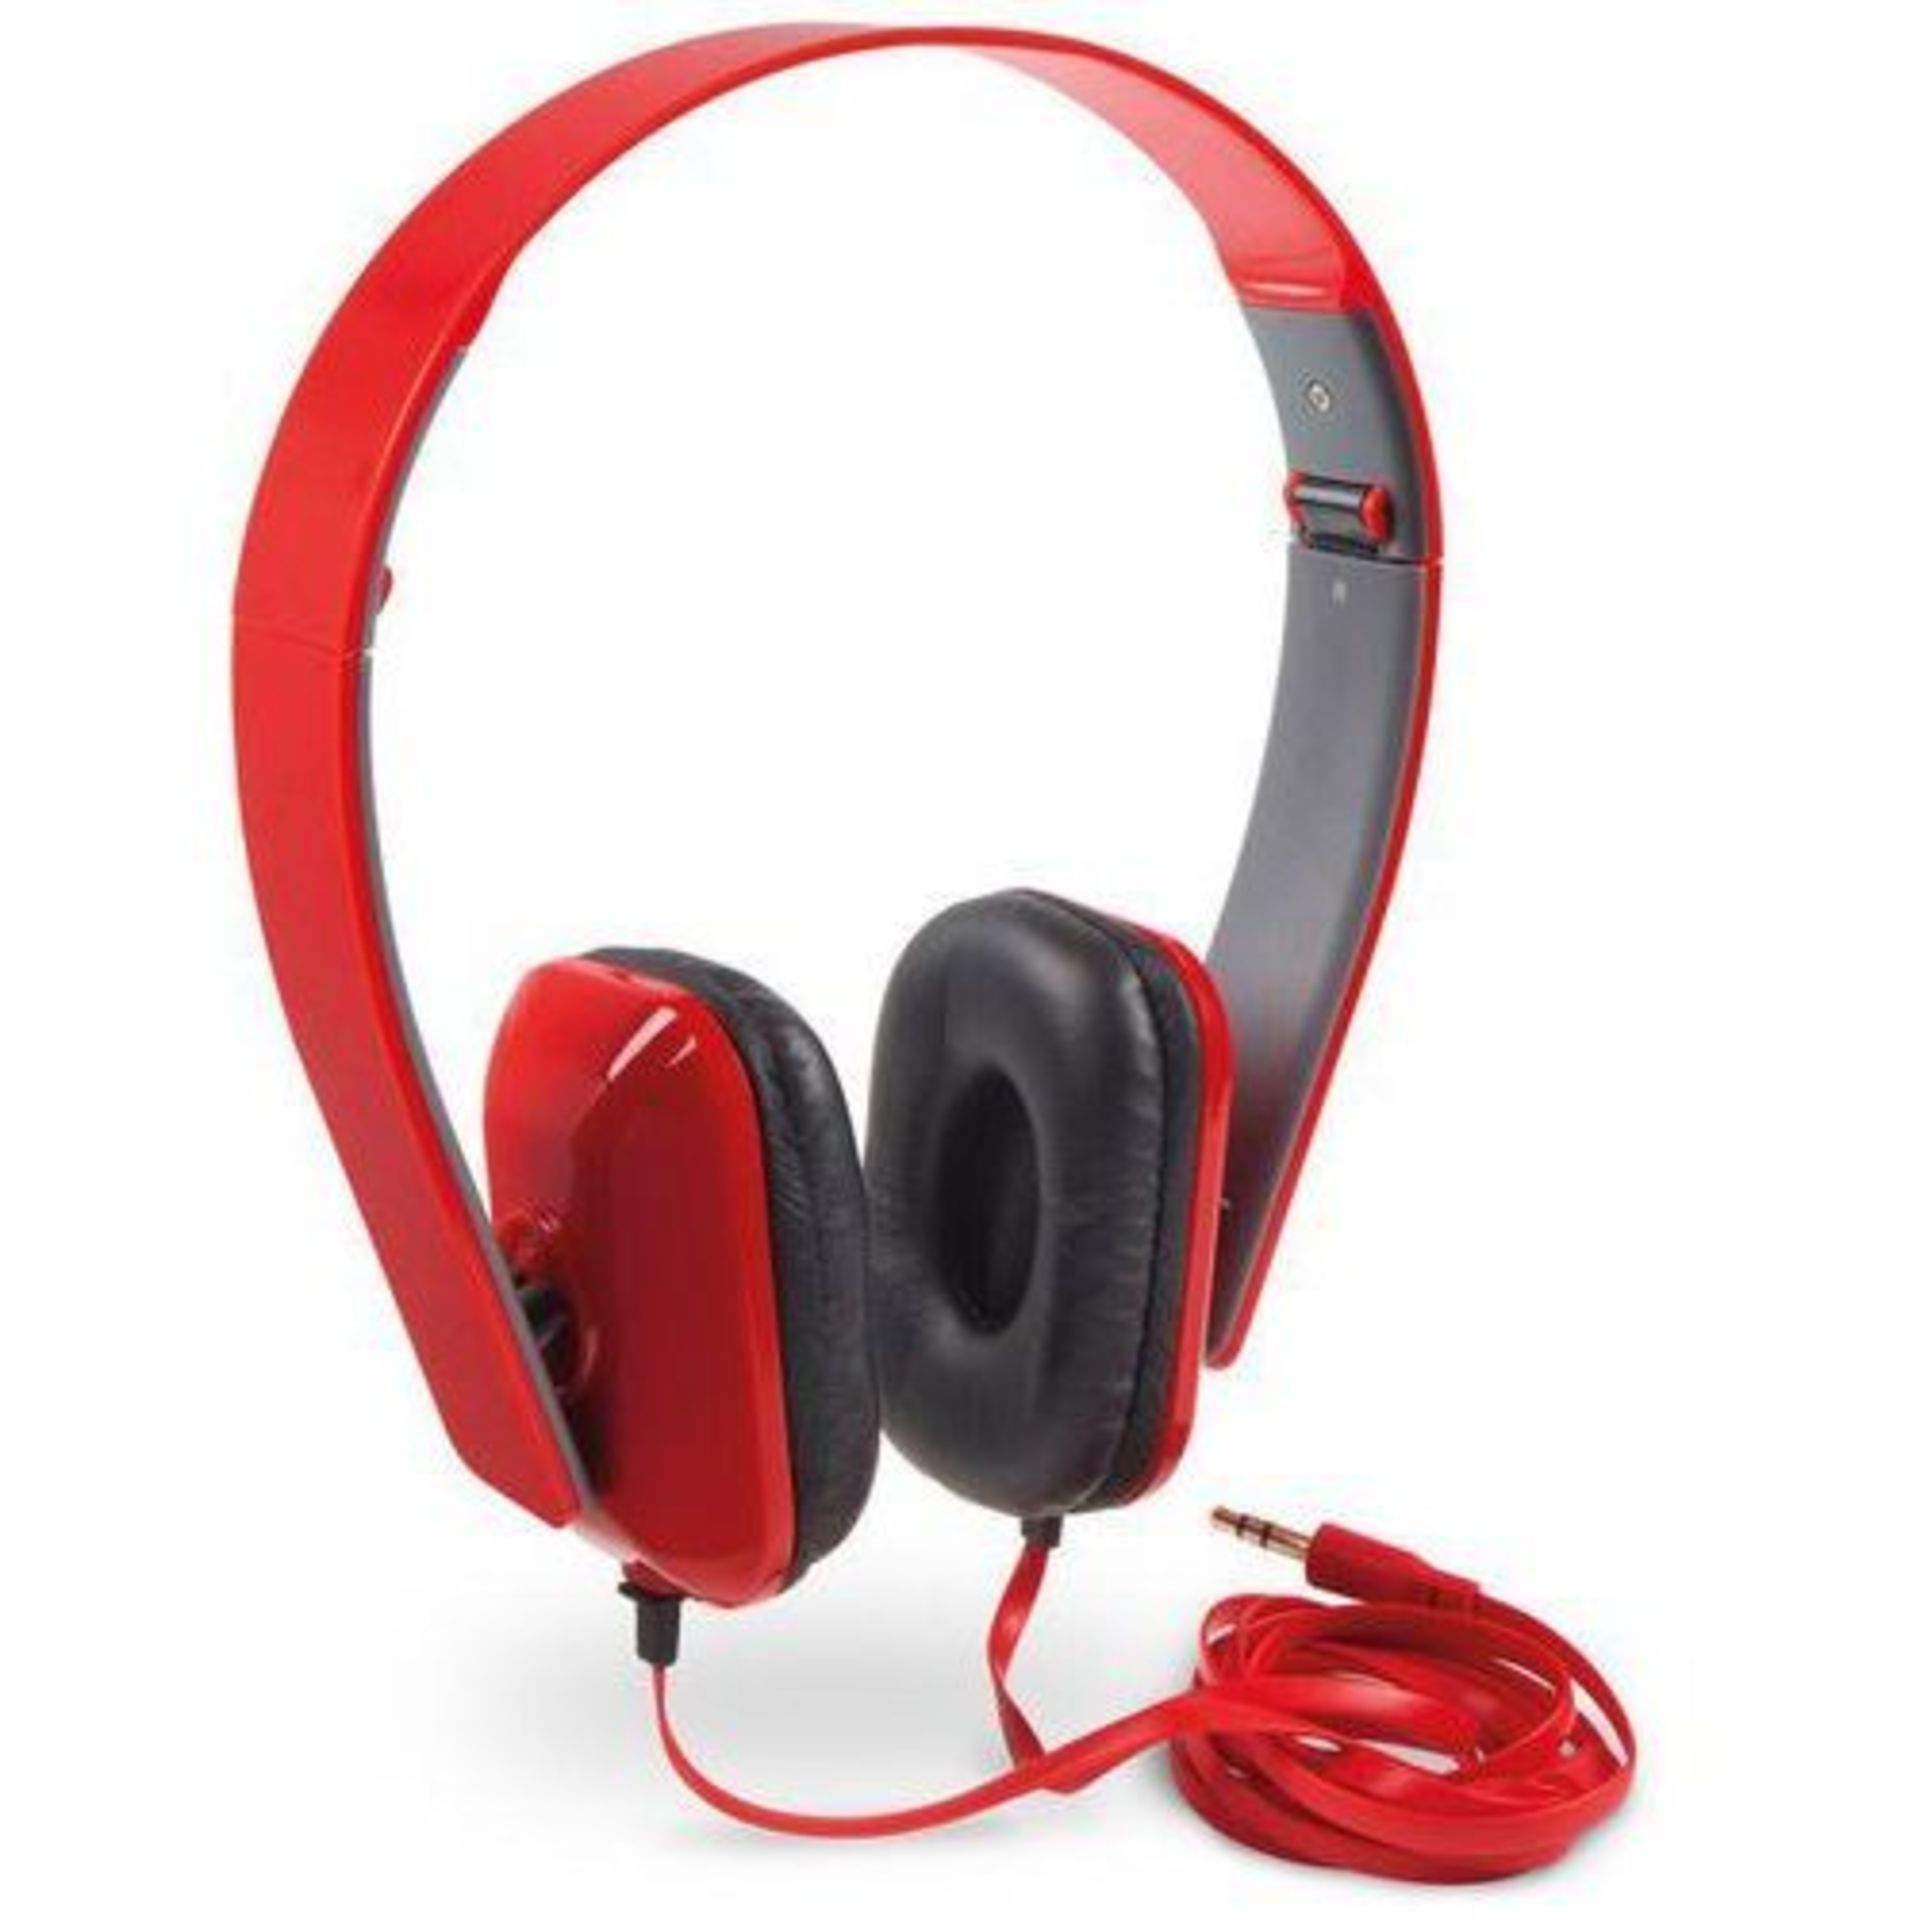 V Brand New Targus Carry & Listen Headphones X 2 YOUR BID PRICE TO BE MULTIPLIED BY TWO